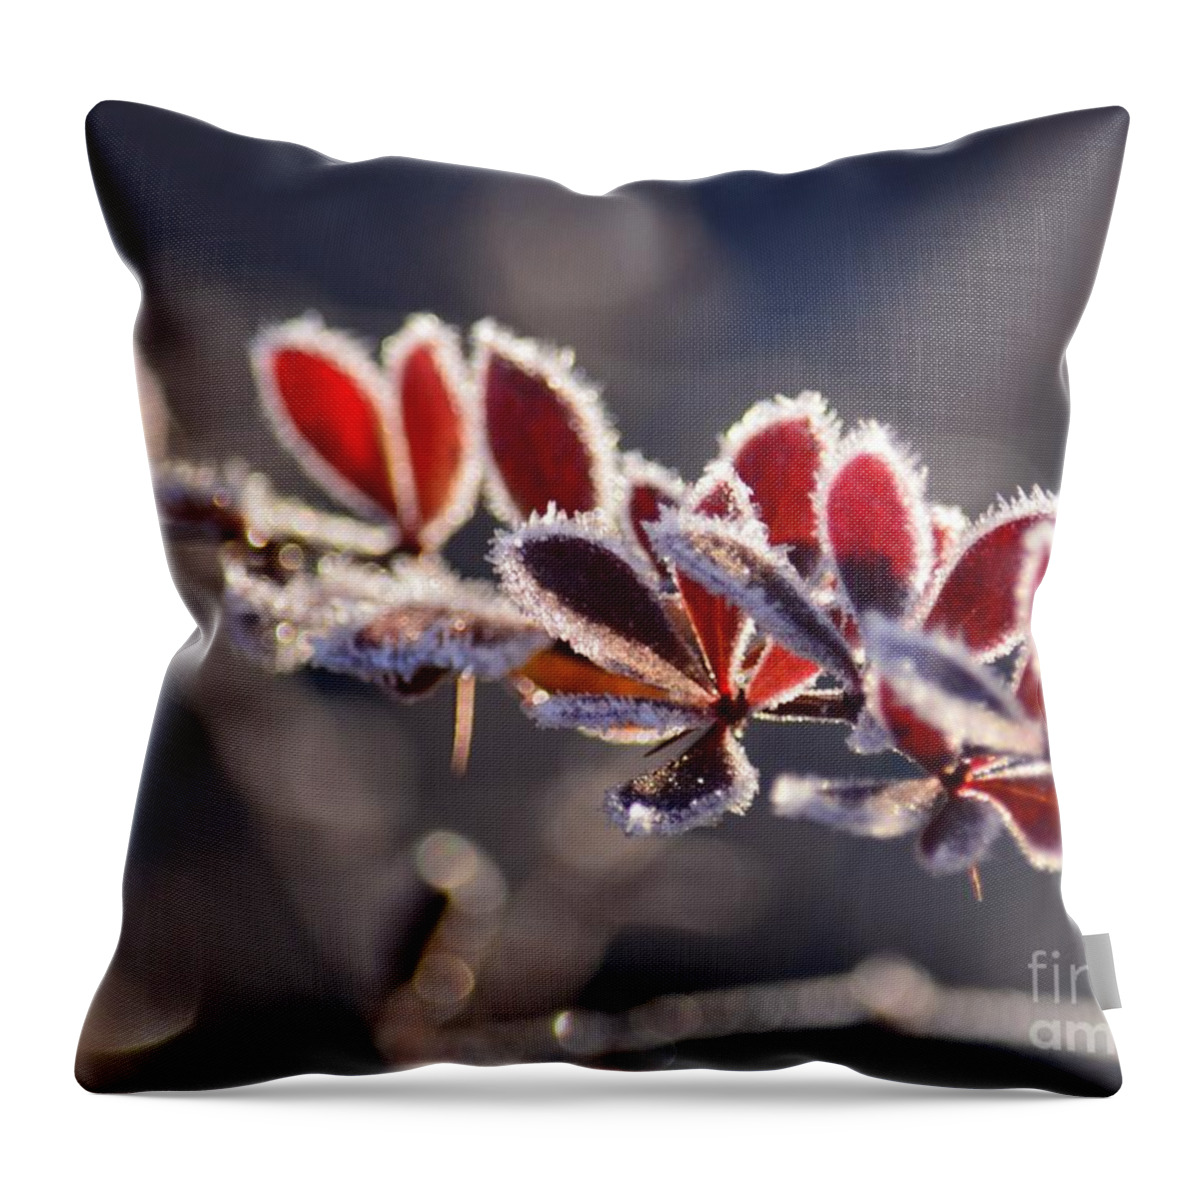 Frosted Red Throw Pillow featuring the photograph Frosted Red by Maria Urso